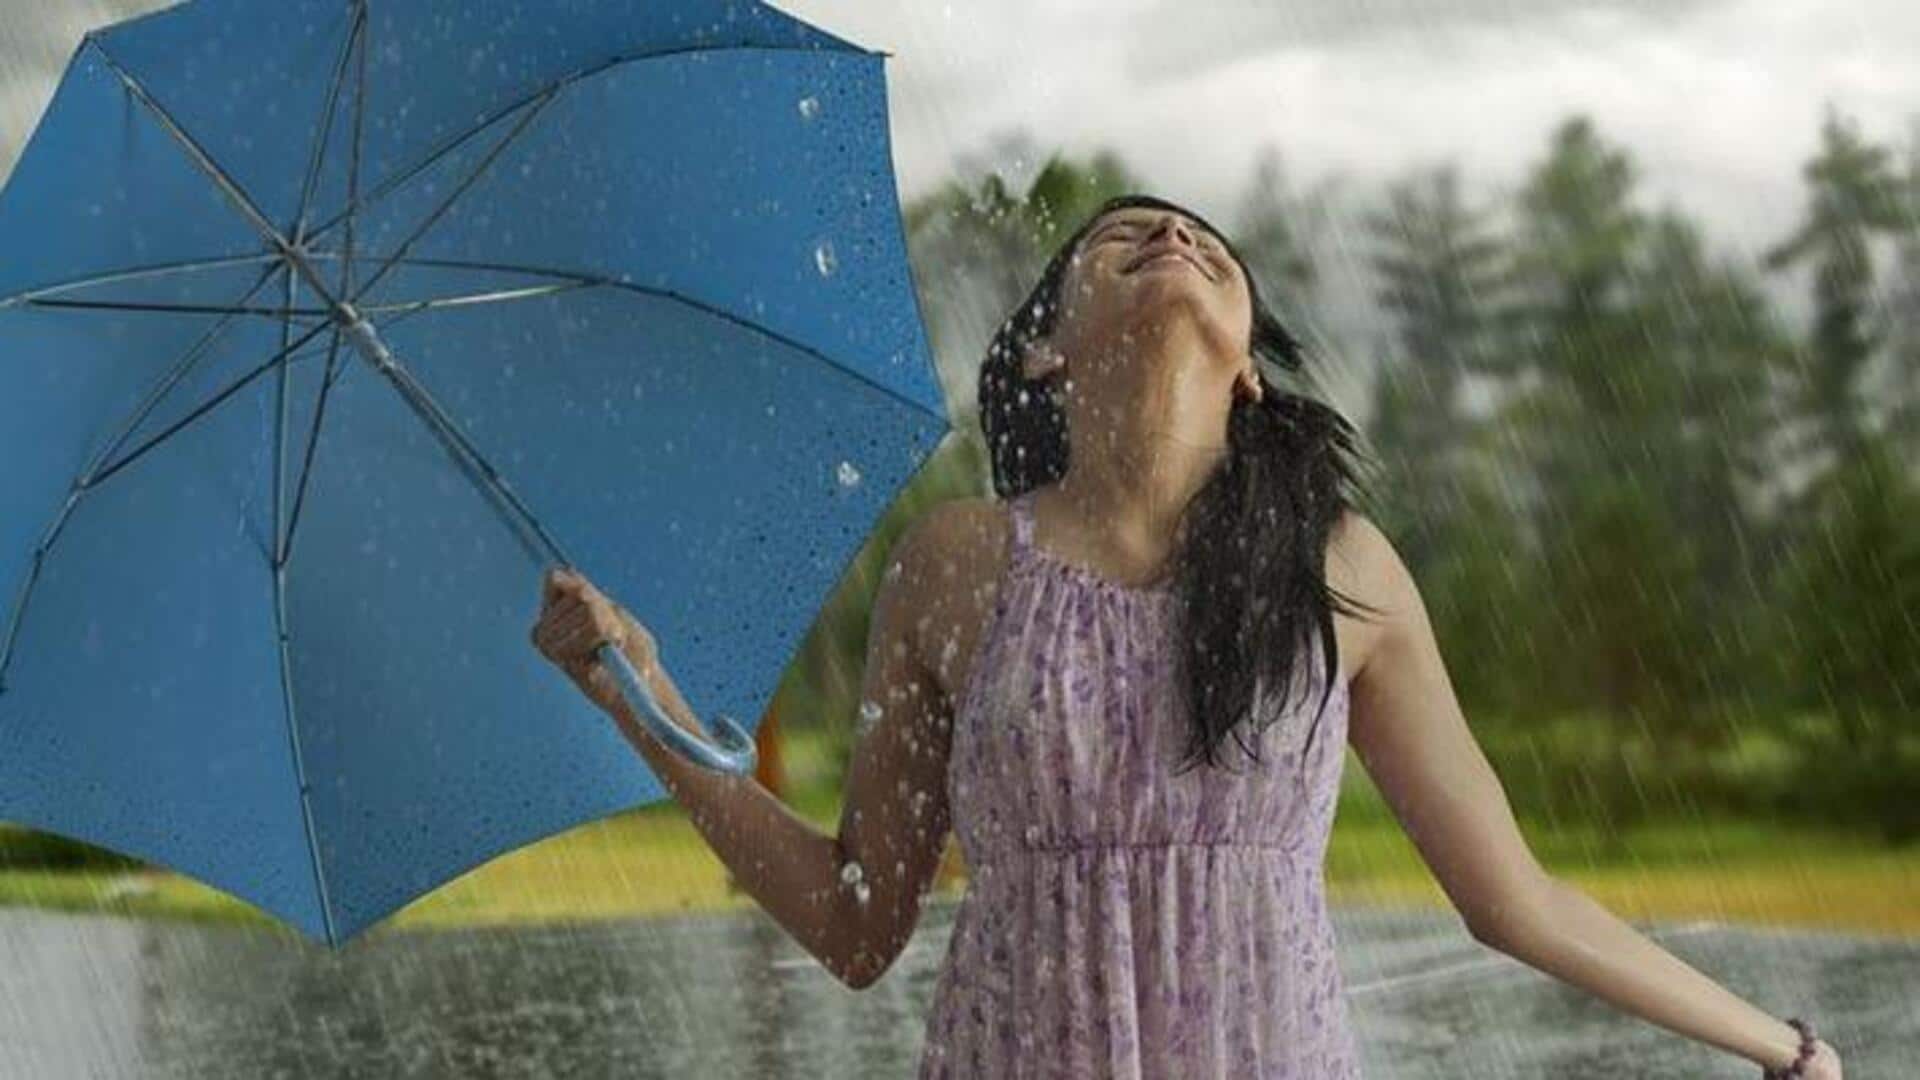 Check out these monsoon fashion must-haves